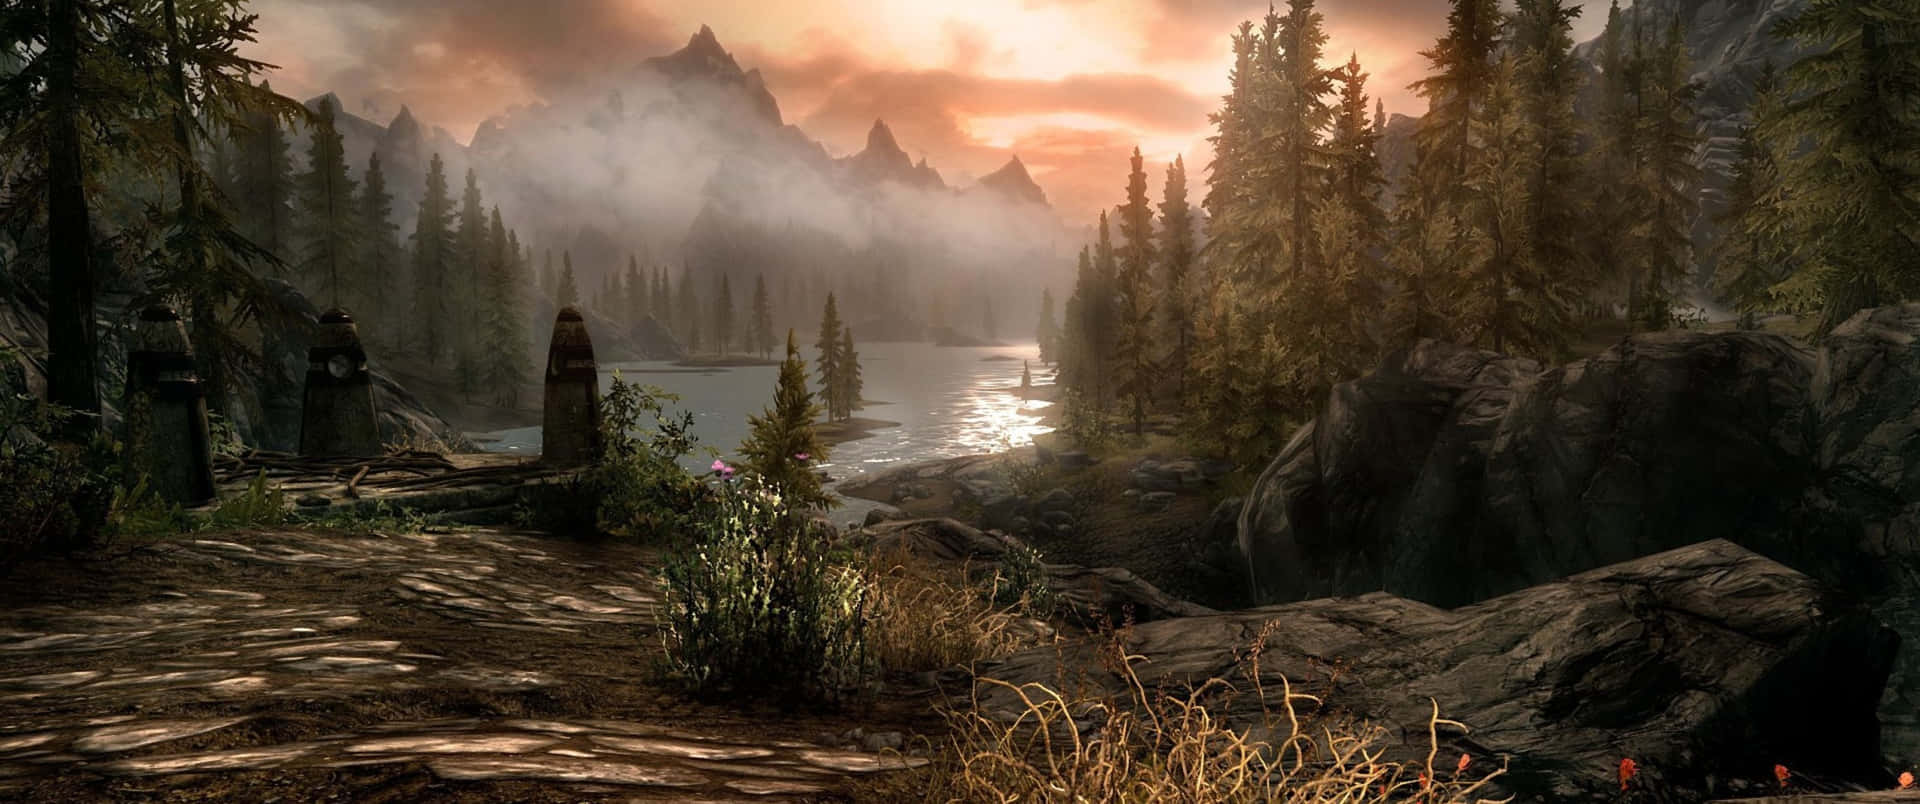 A view of The Elder Scrolls V: Skyrim, one of the most iconic fantasy-adventure RPG video games